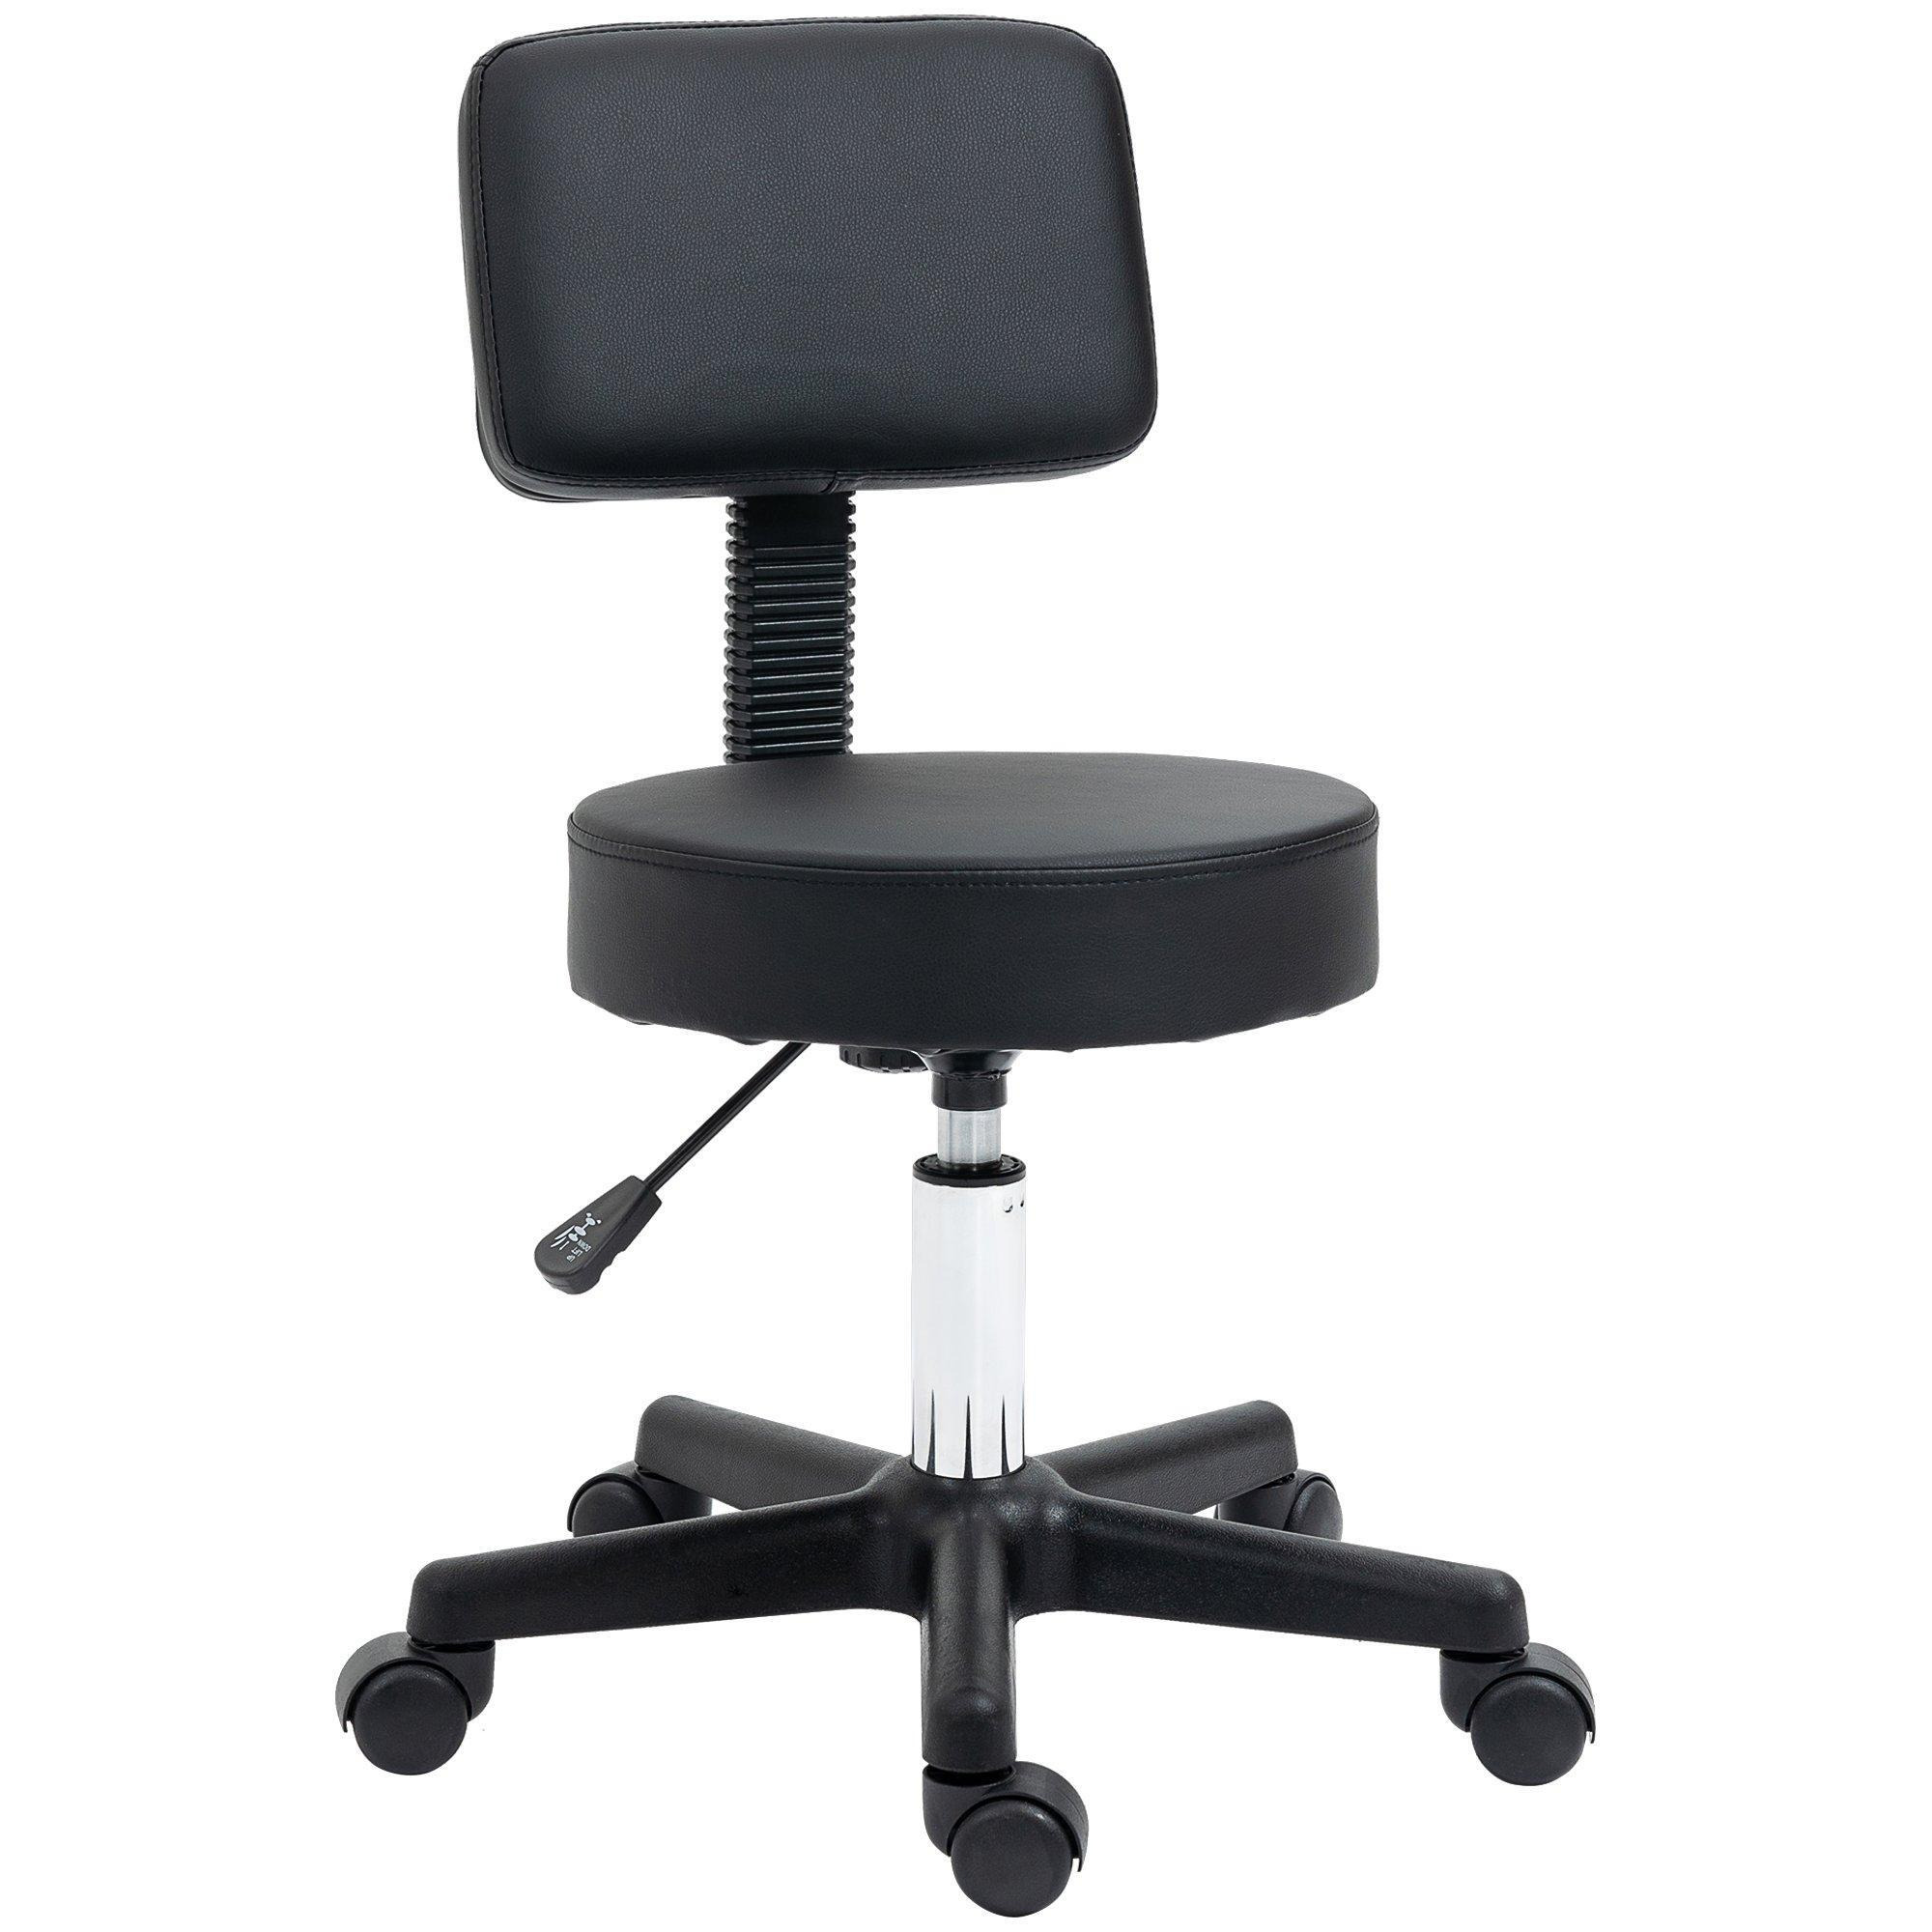 Beautician's Adjustable Swivel Salon Chair and Padded Seat Back - image 1